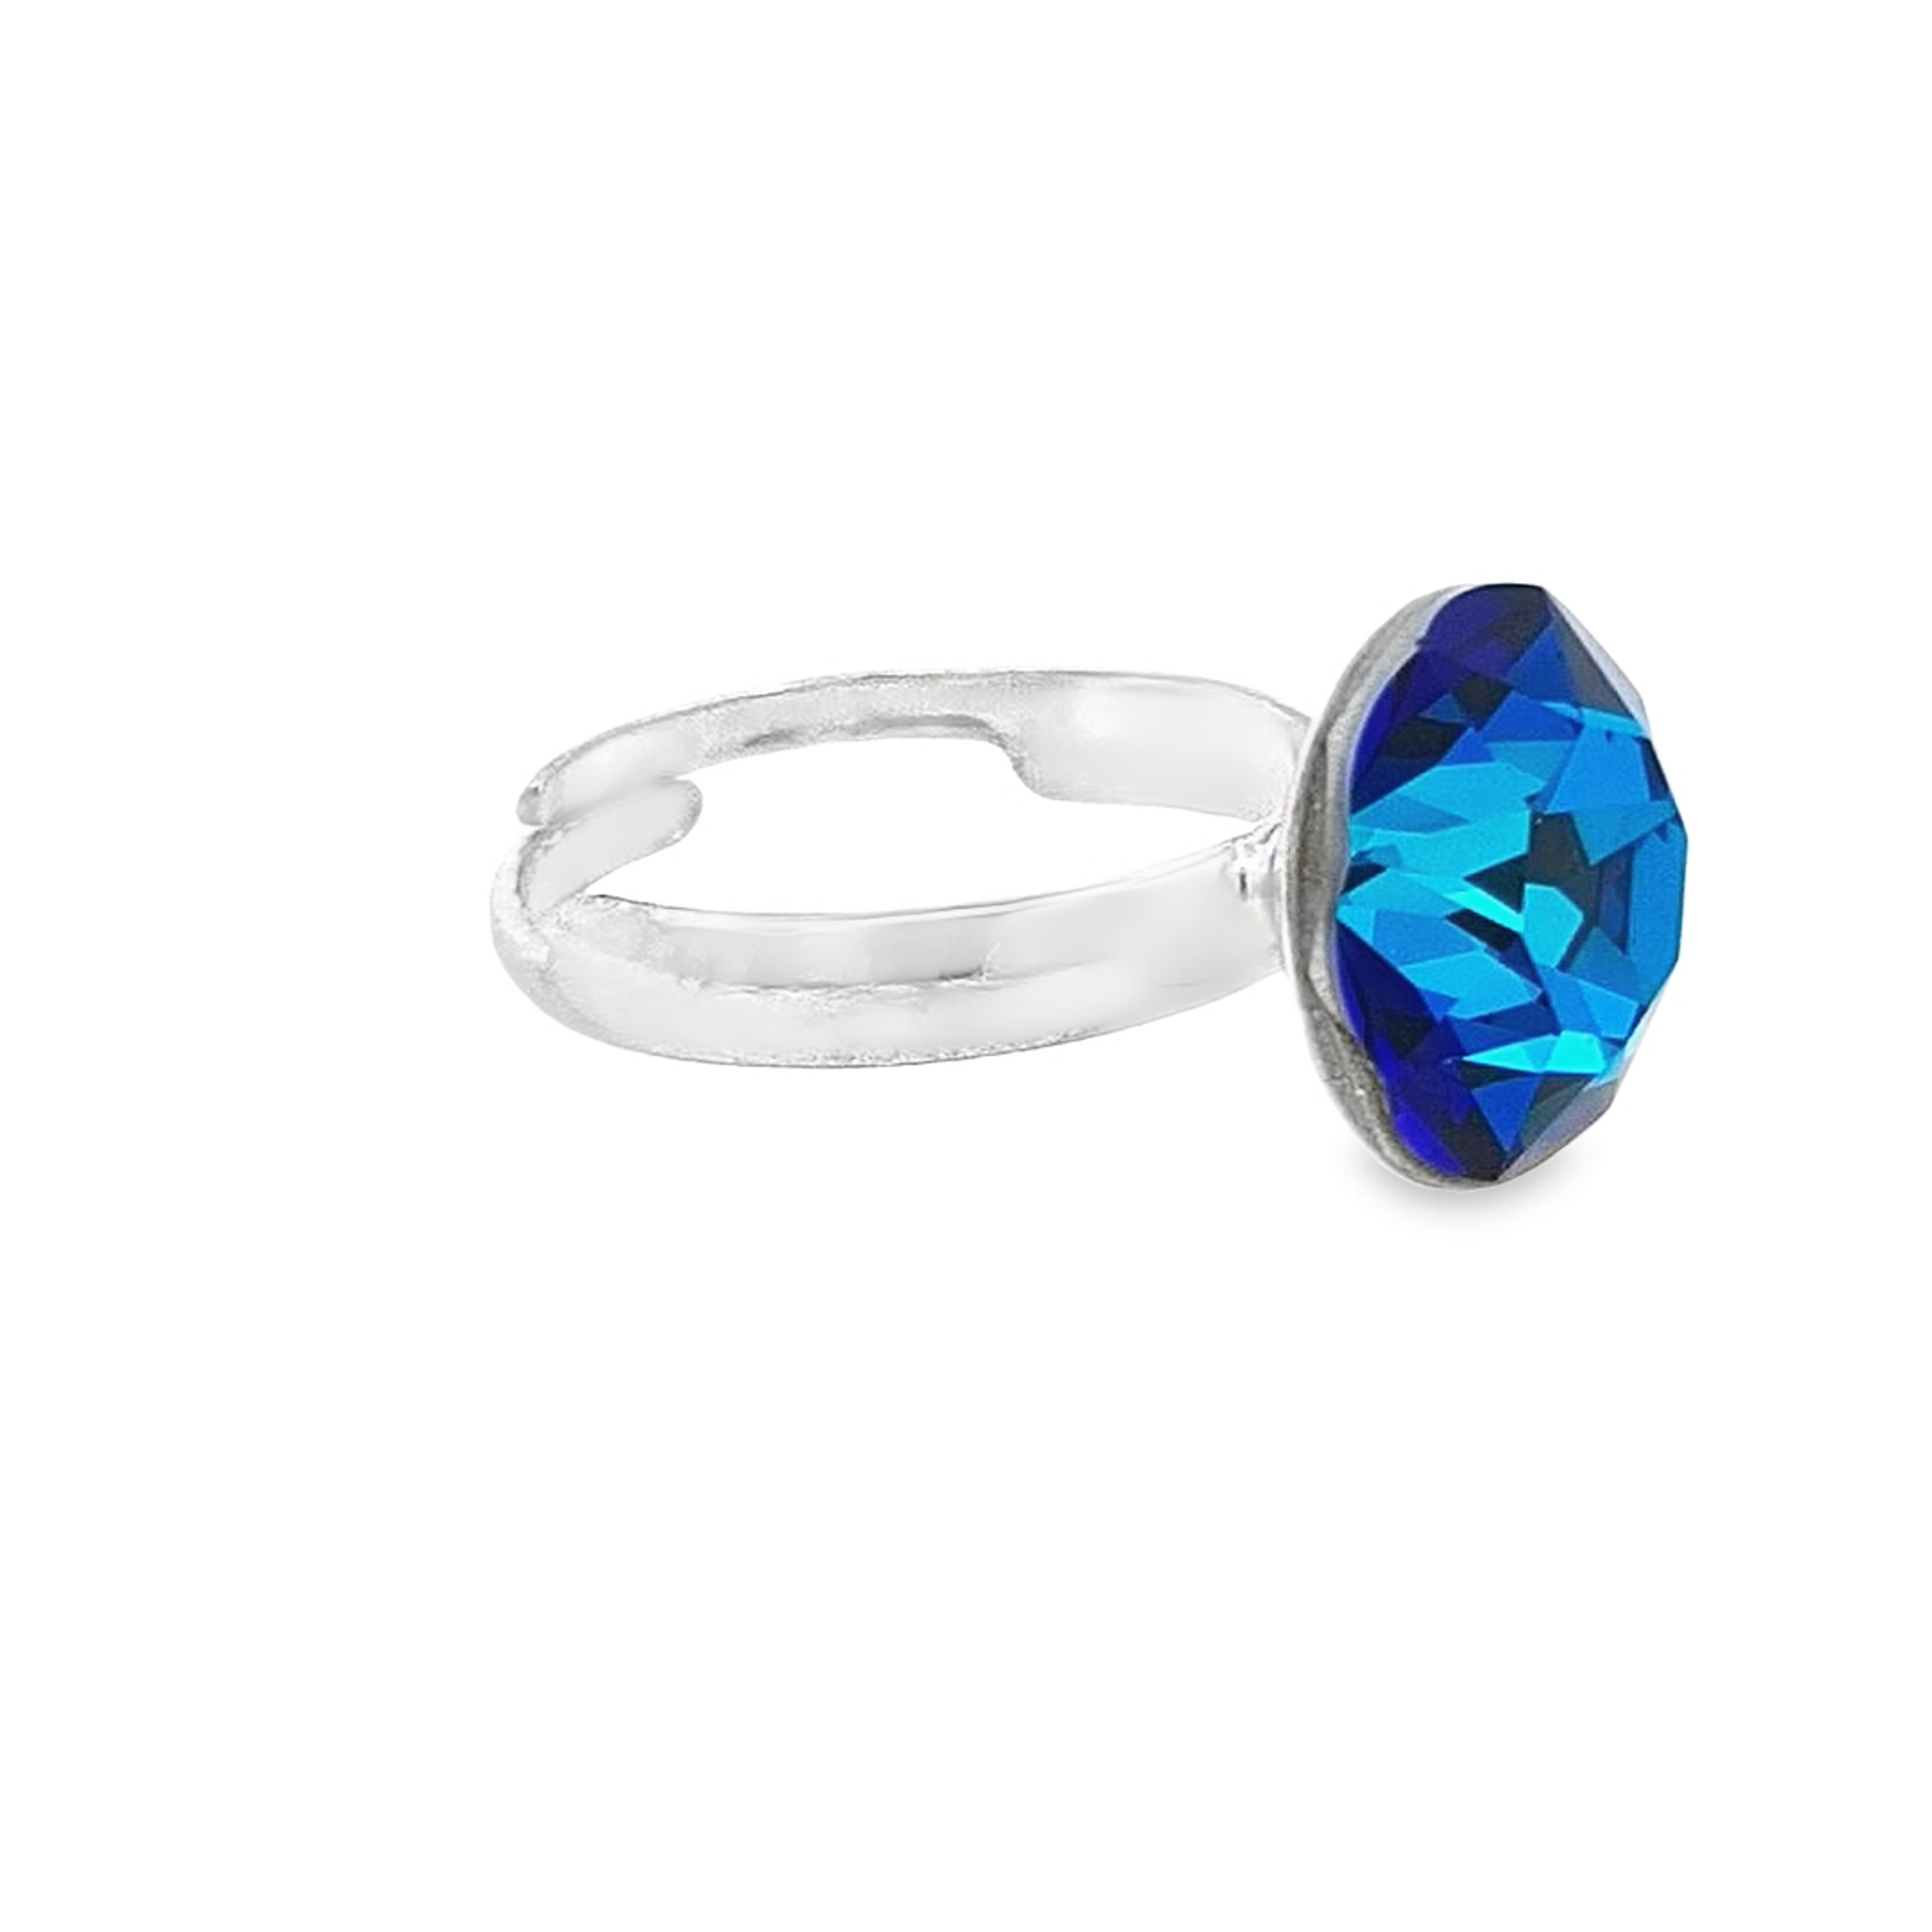 Bermuda Breeze - Sterling Silver Ring with Side View of Ocean Blue Chaton Crystal - Magpie Gems Ireland